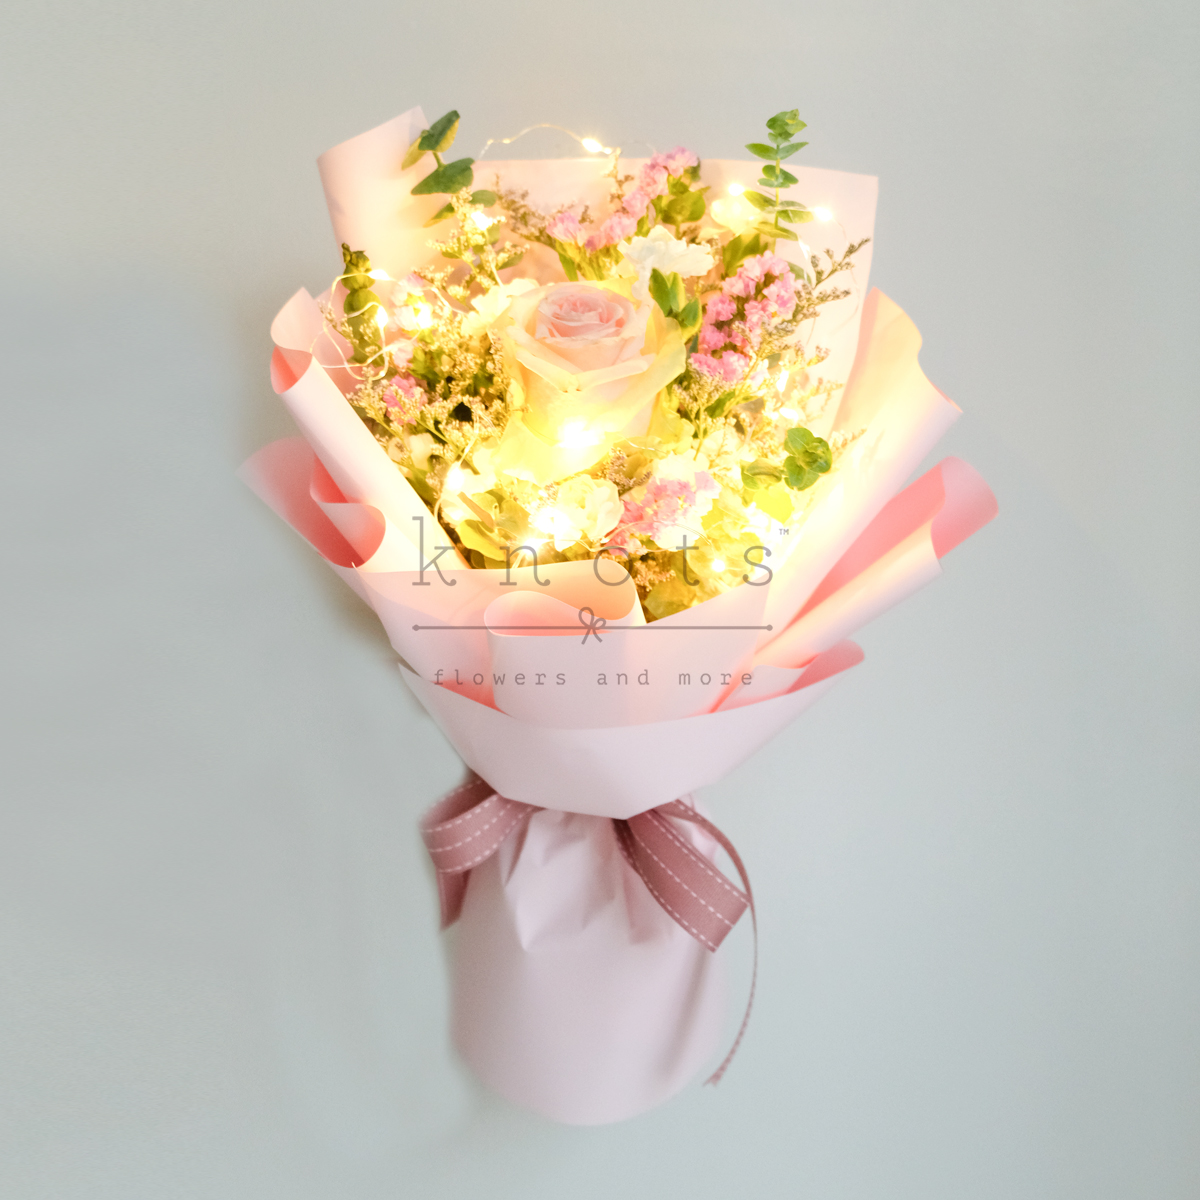 Blushing Meadow (Pink Roses with Fairy Lights)